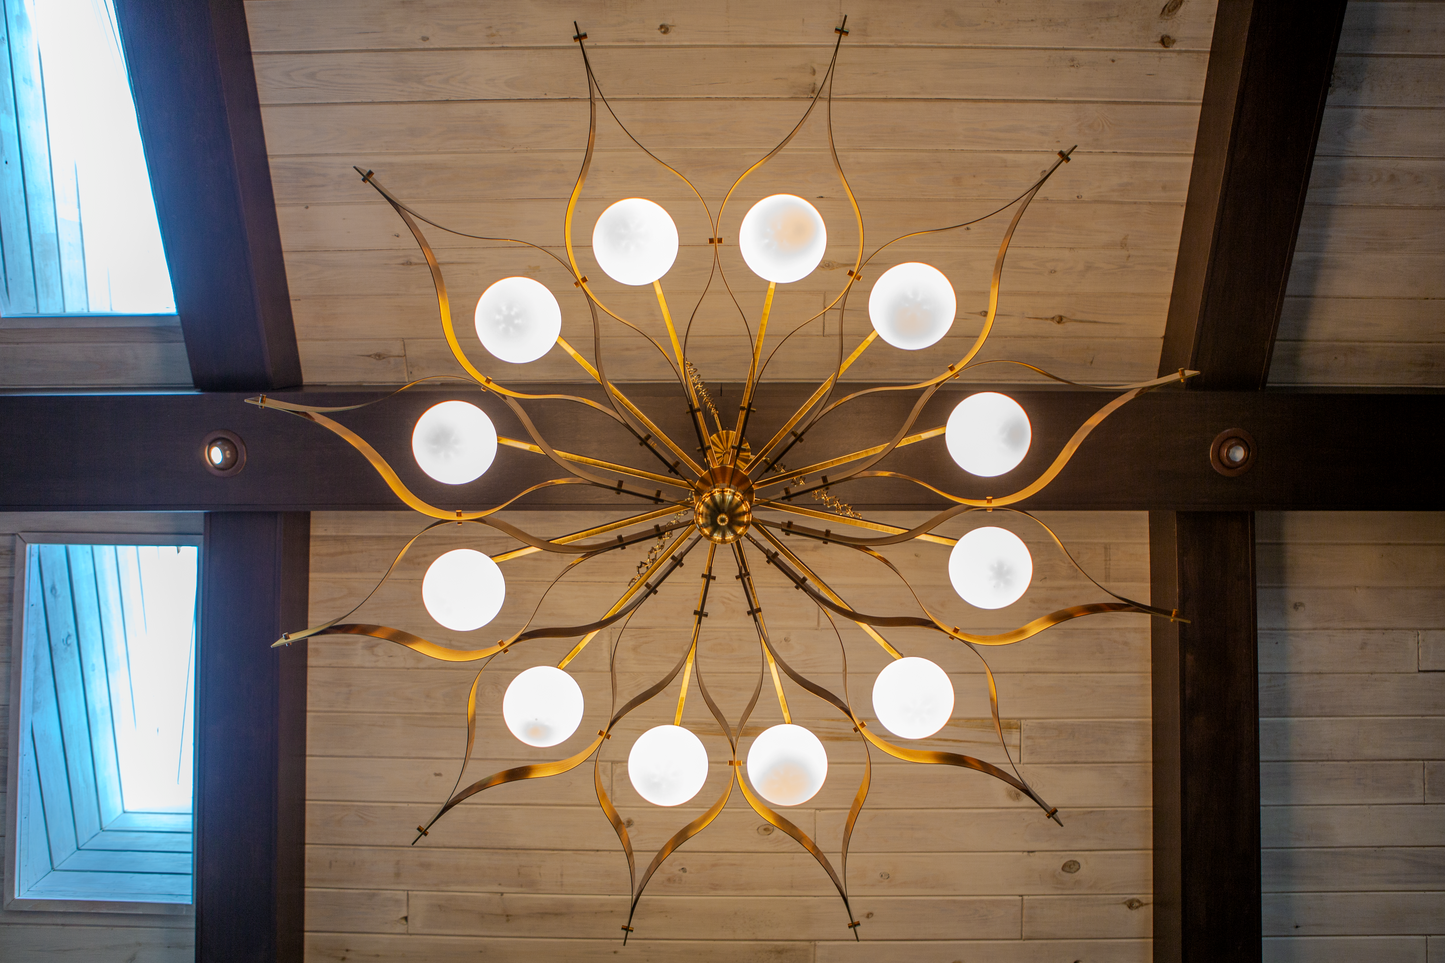 SPECIAL ORDER PAVONE CHANDELIER BY GIO PONTI CHANDELIER